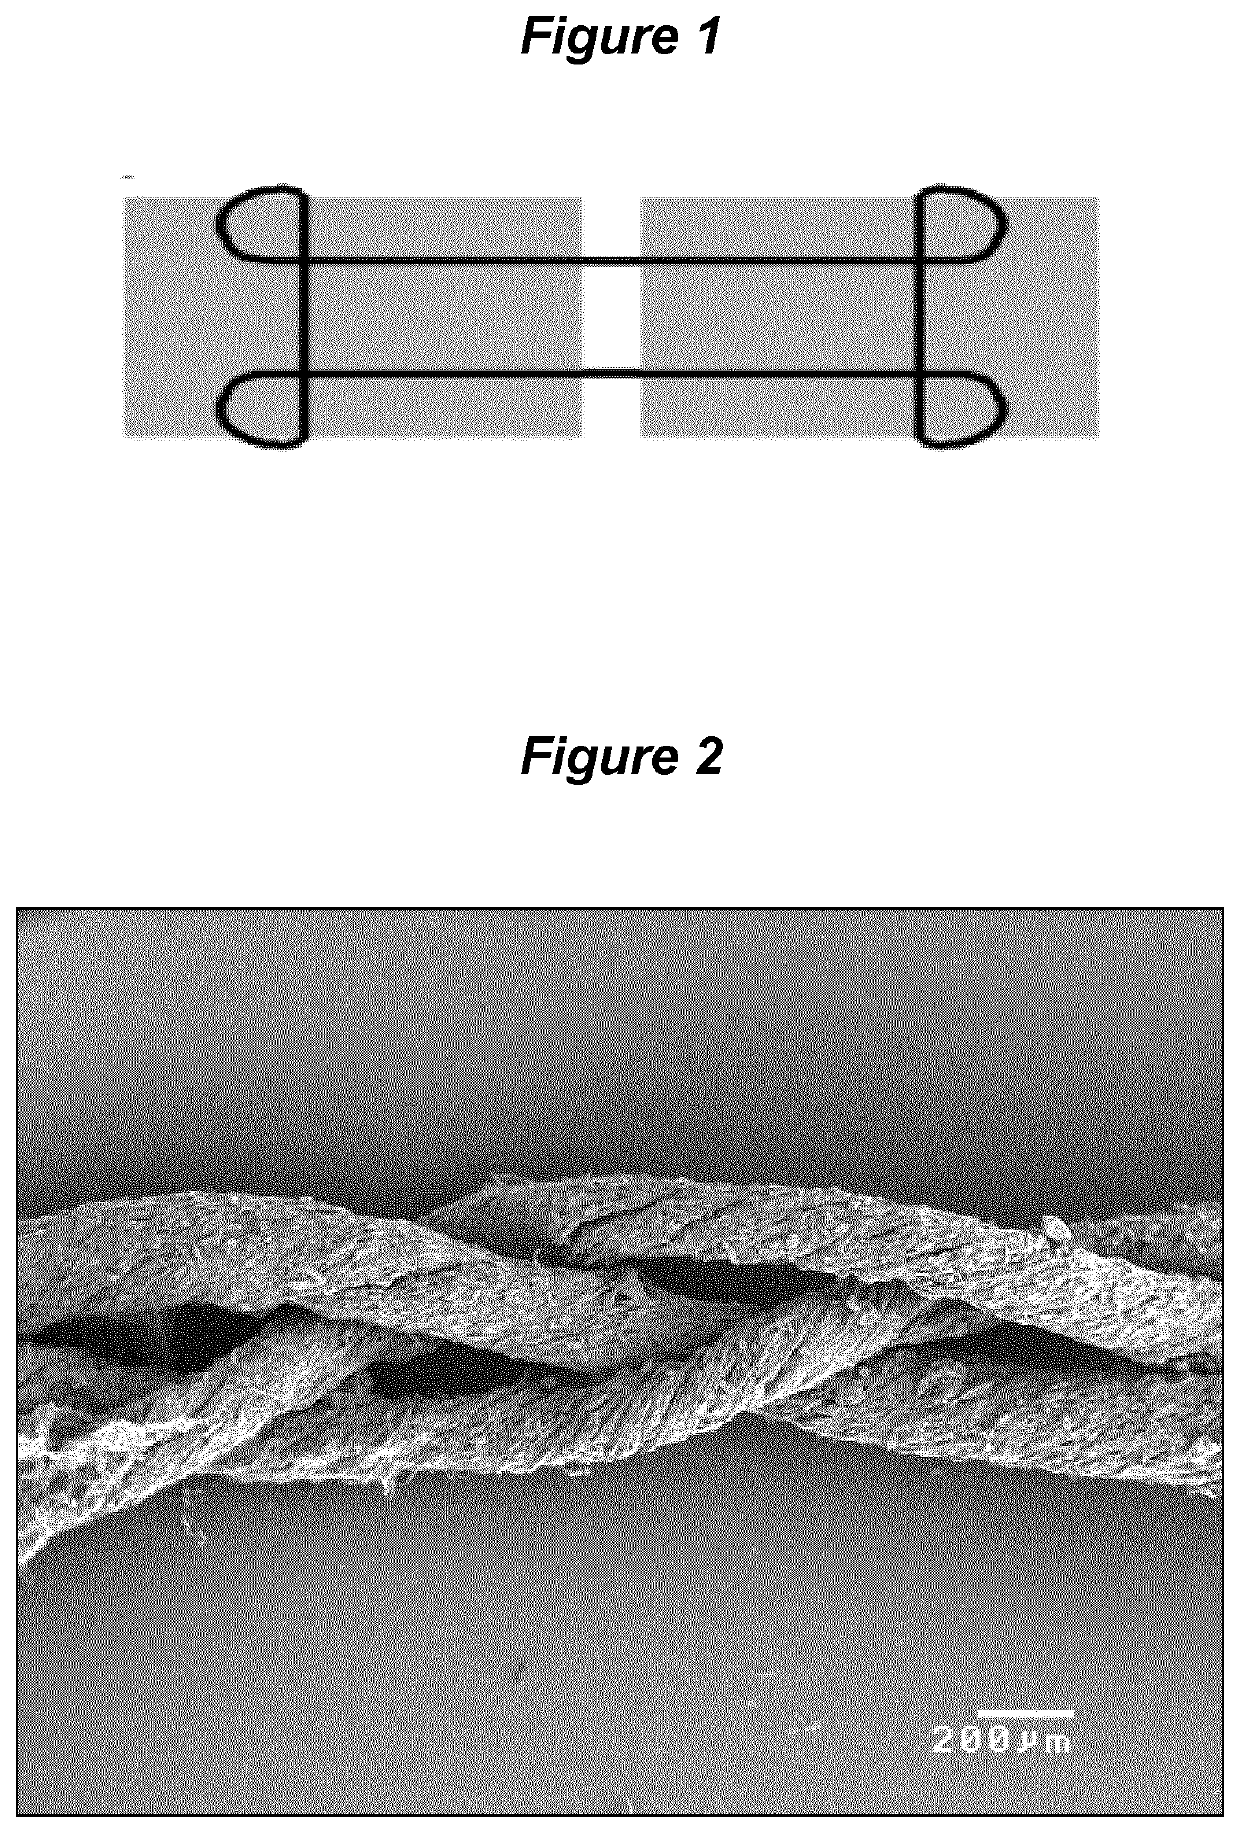 Tissue repair scaffold and device